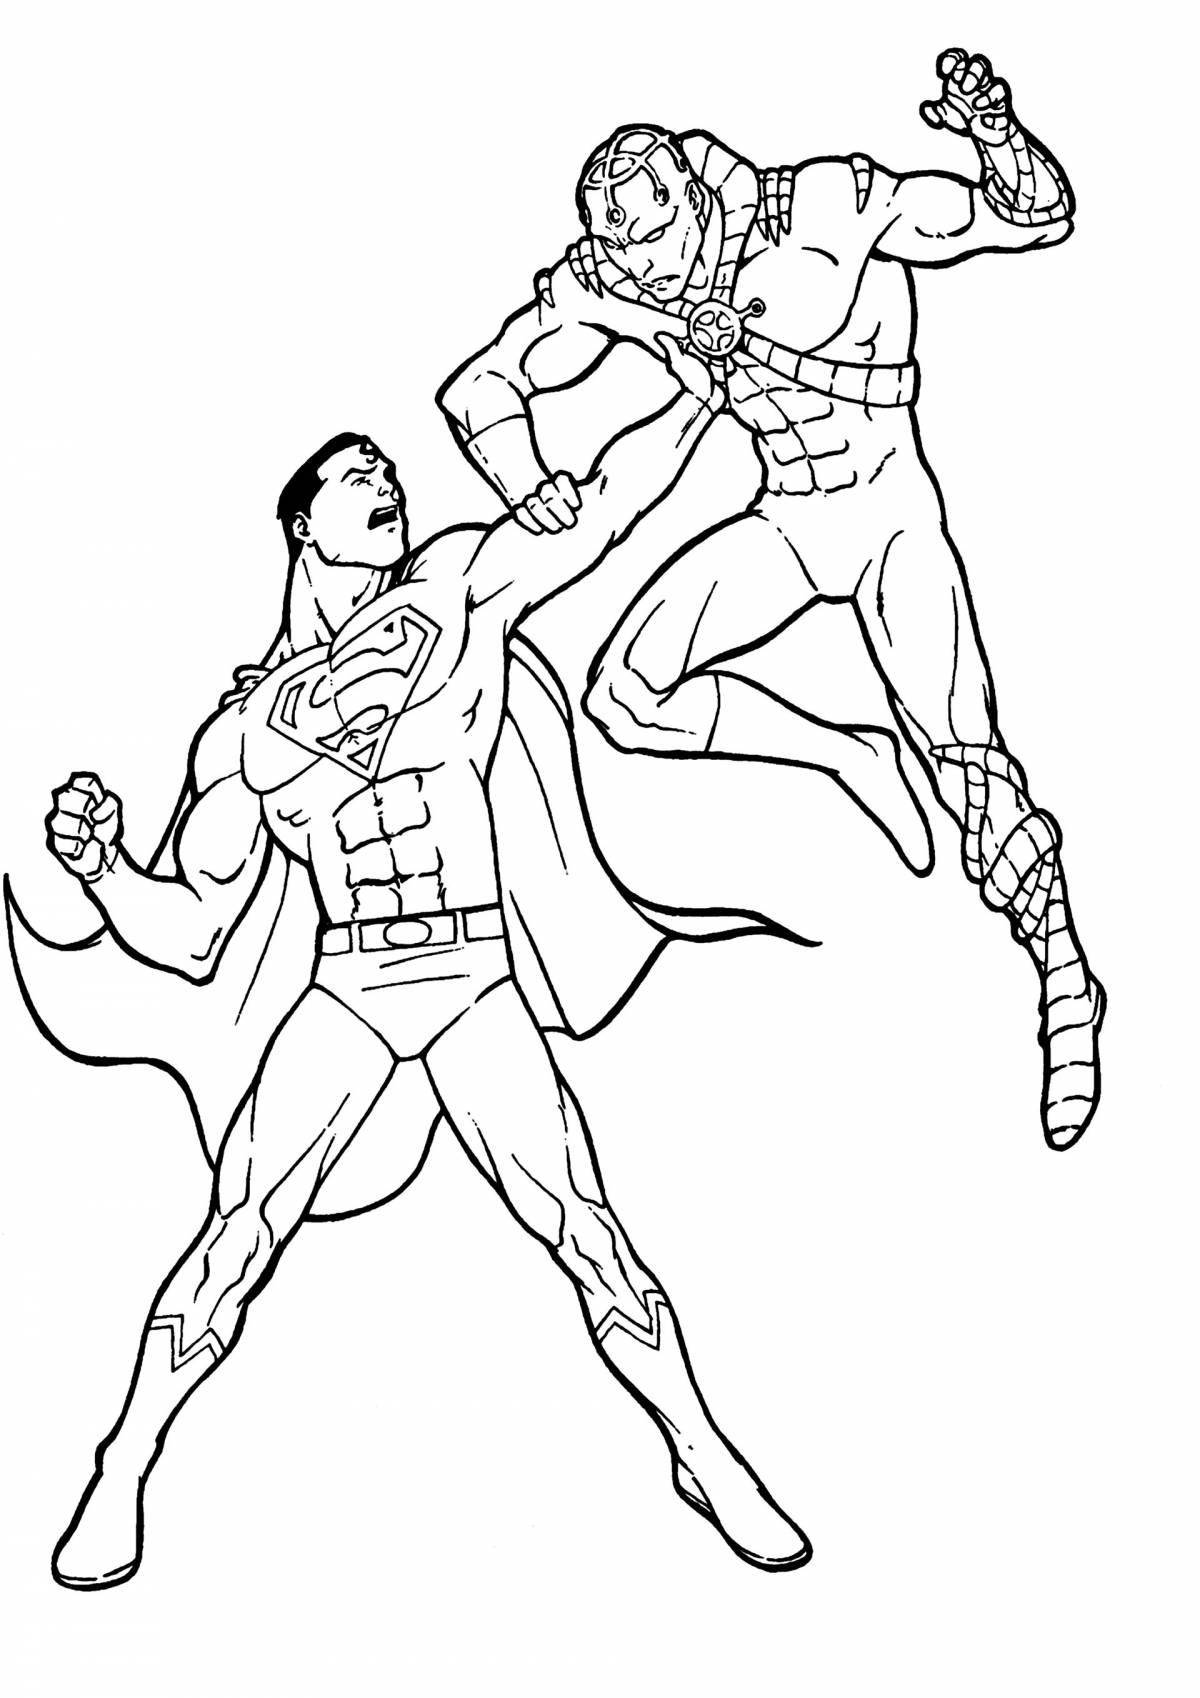 Marvelous superman and spiderman coloring book